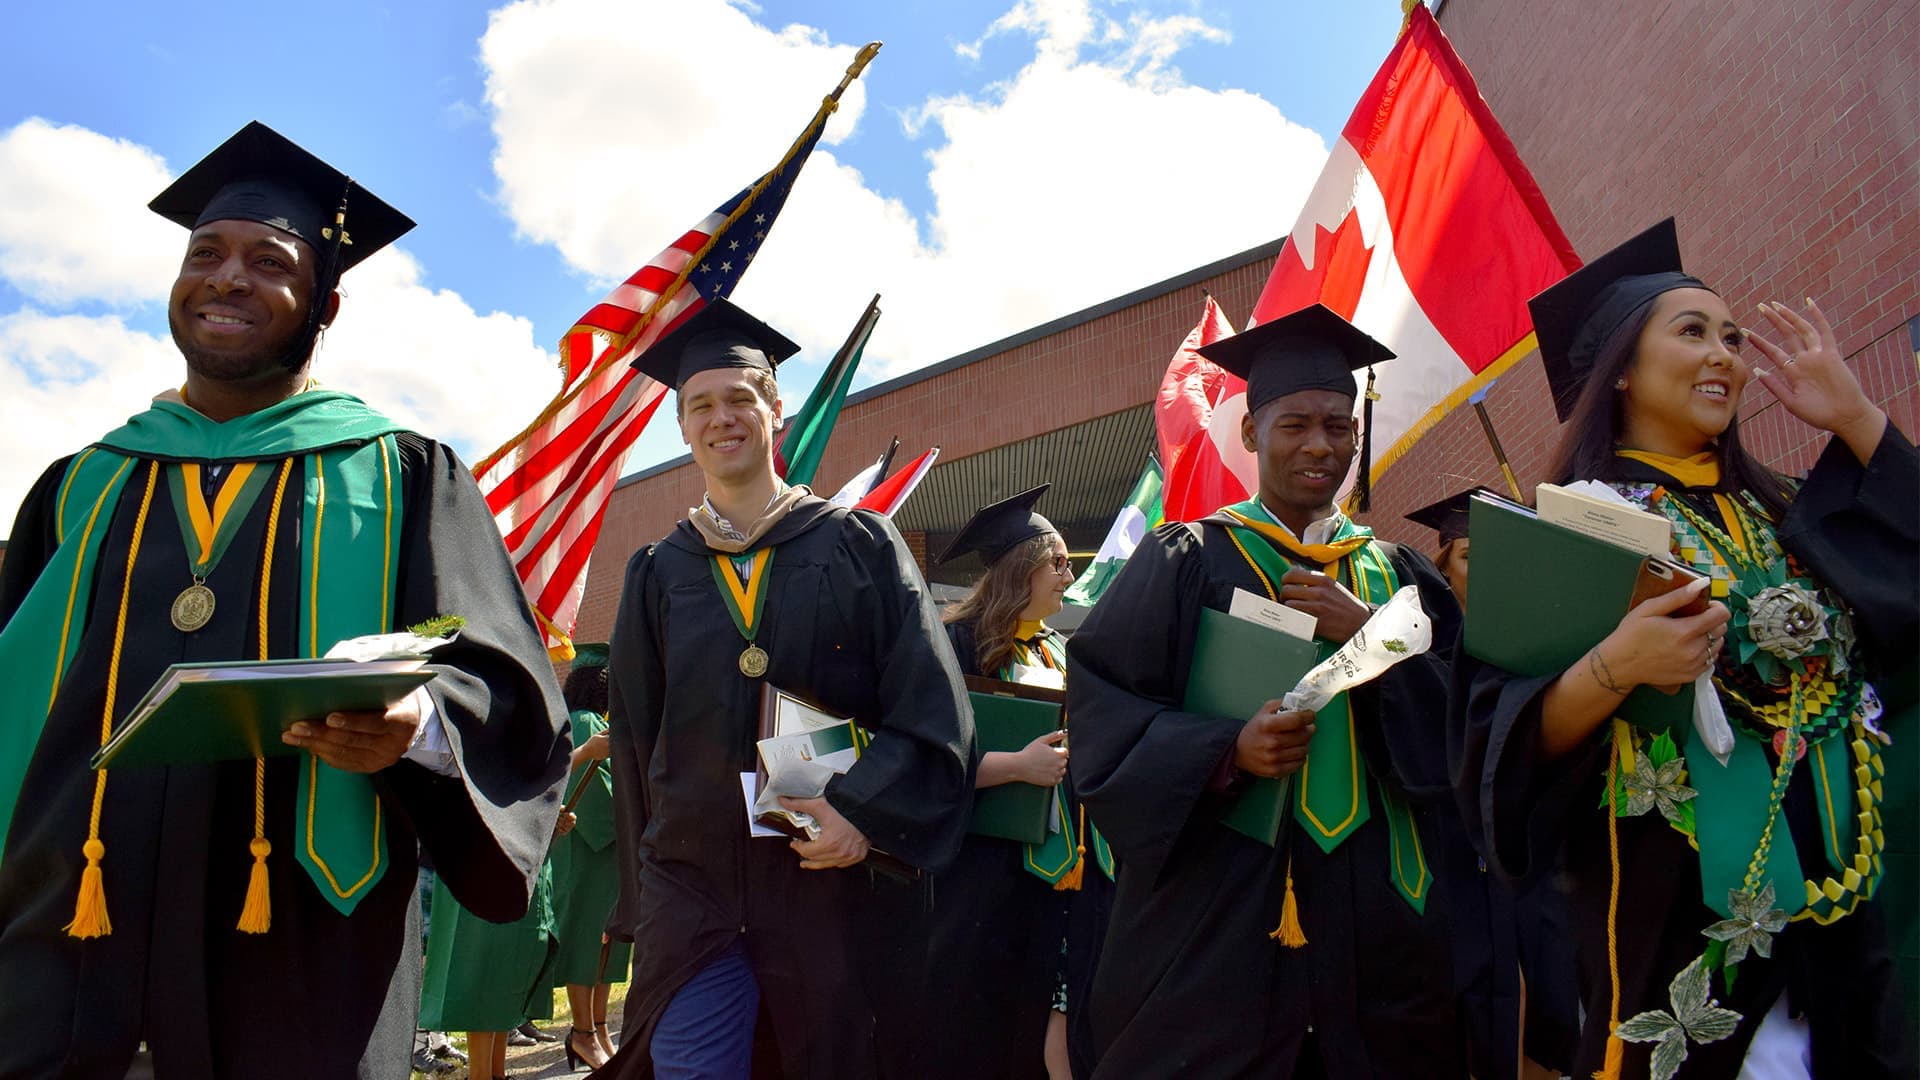 Students marching in commencement